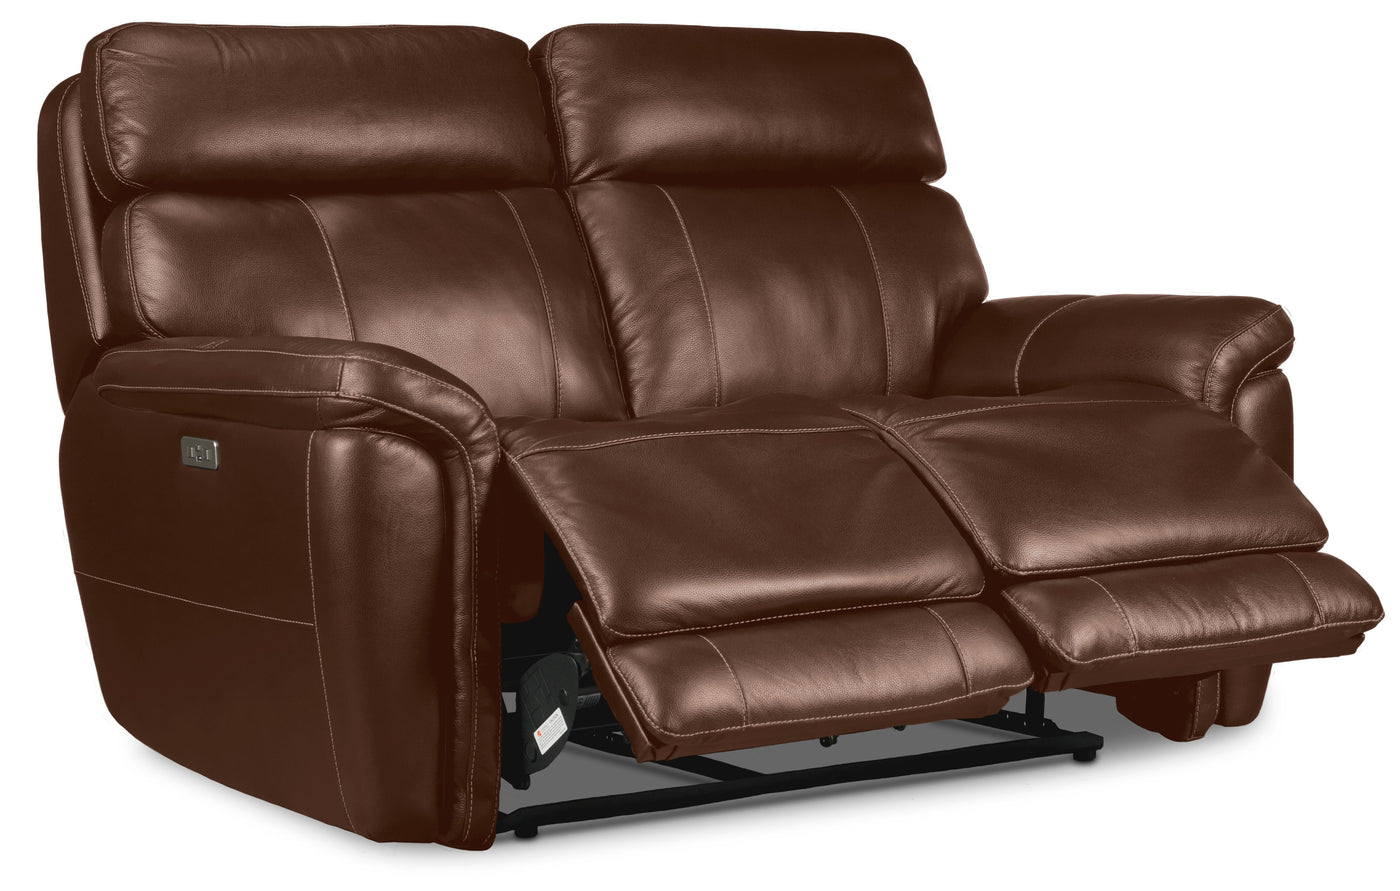 Stallion Leather Dual Power Reclining Sofa and Loveseat Set - Chestnut